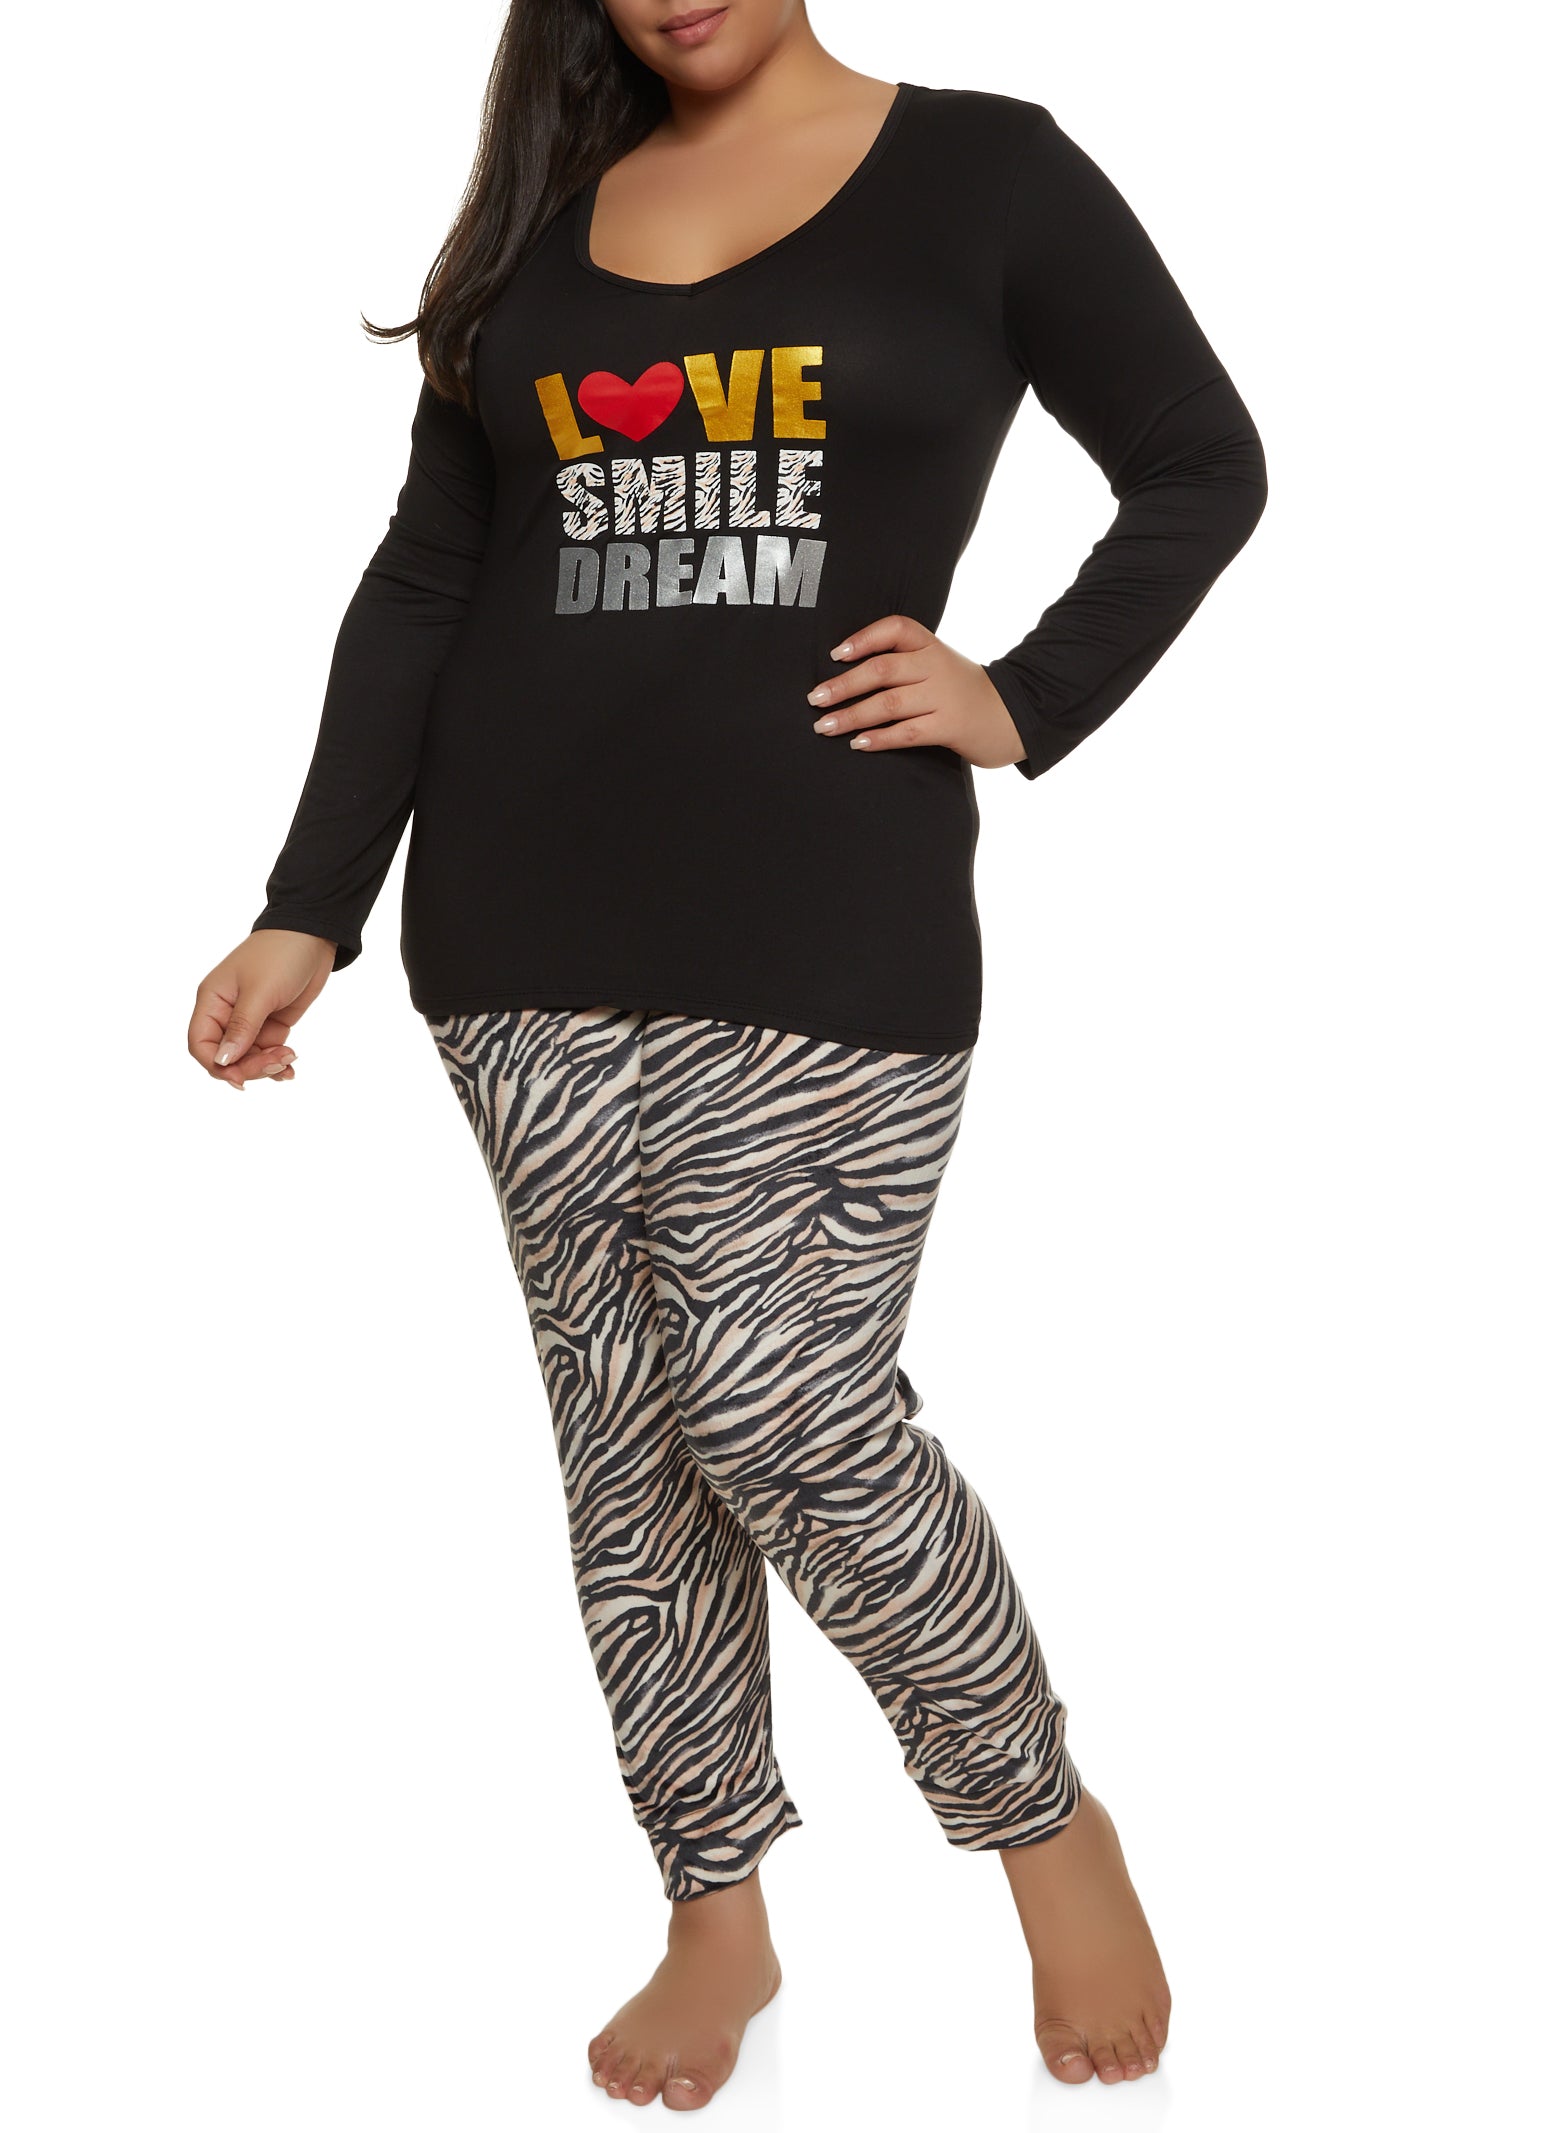 Rainbow Shops Womens Plus Size Love Smile Dream Pajama Top and Printed Pants,  Multi, Size 3X